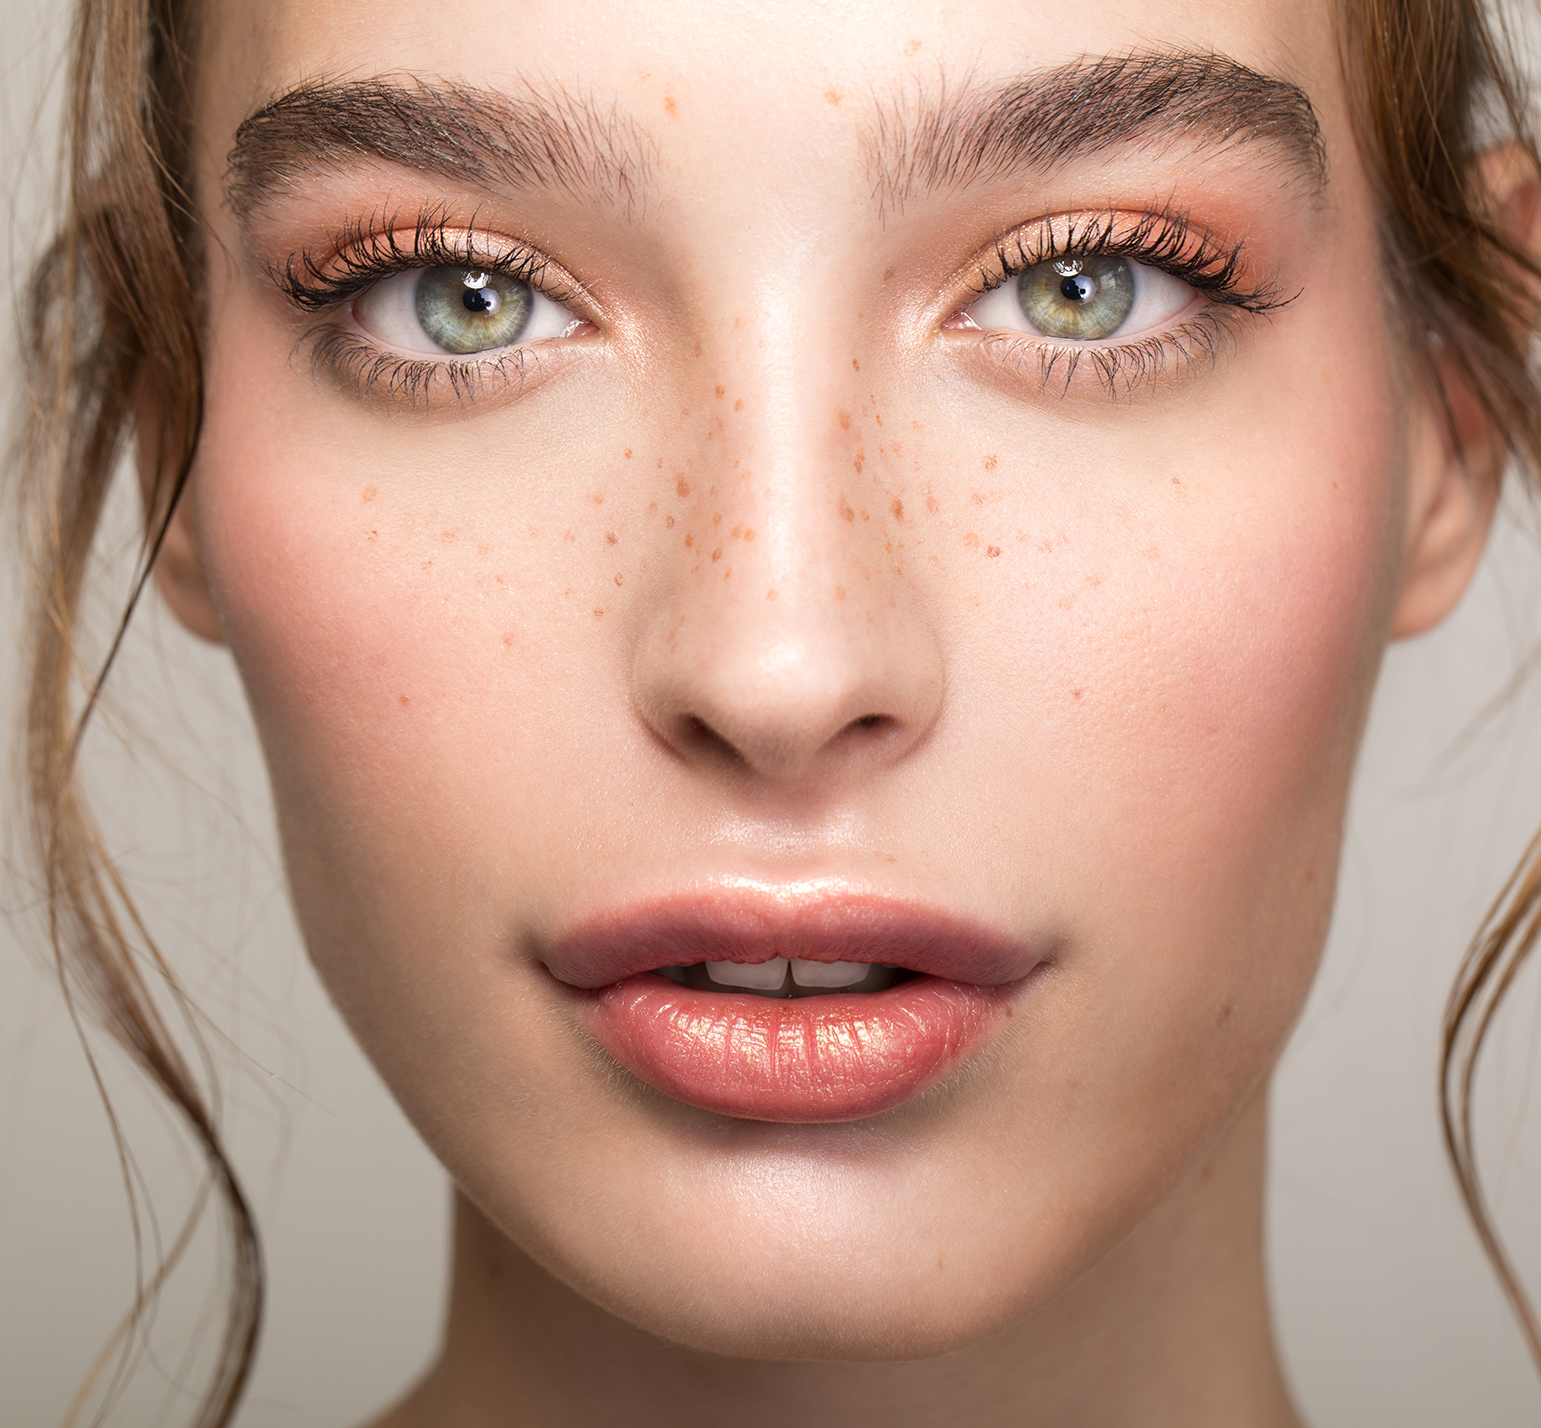 The Vila Institute for Plastic Surgery Blog | Are Lip Lifts Permanent? Exploring Long-Term Results